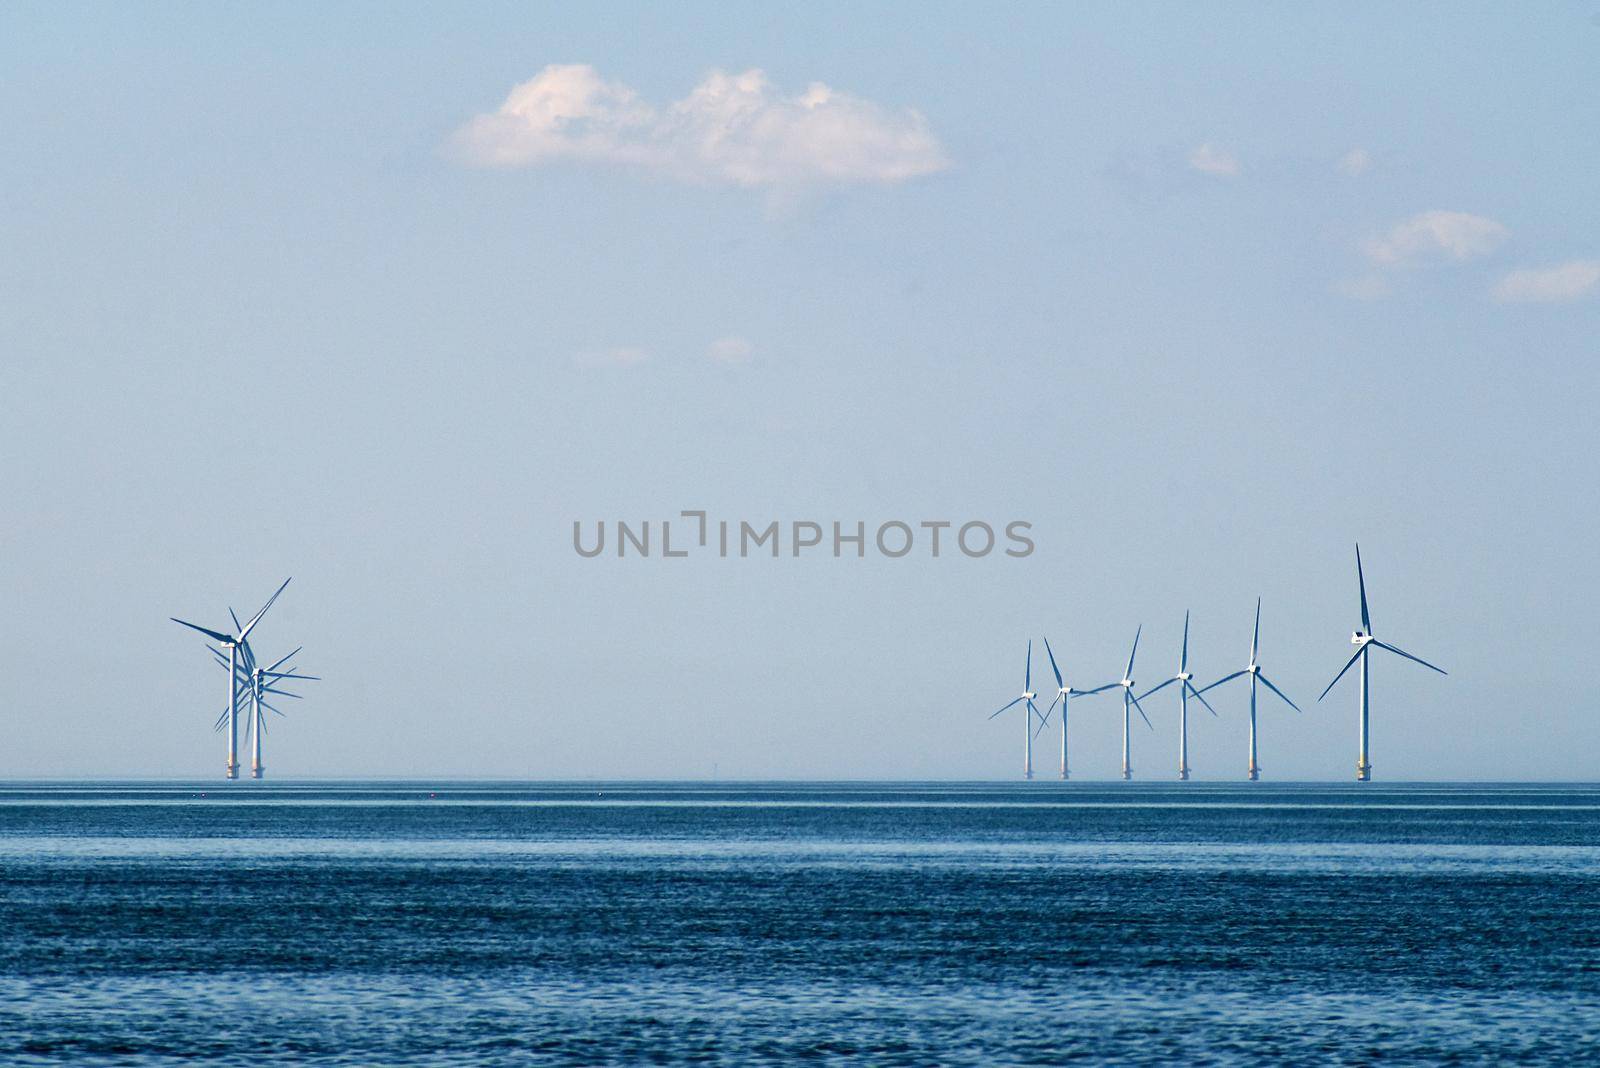 Tall white wind turbines in the distance